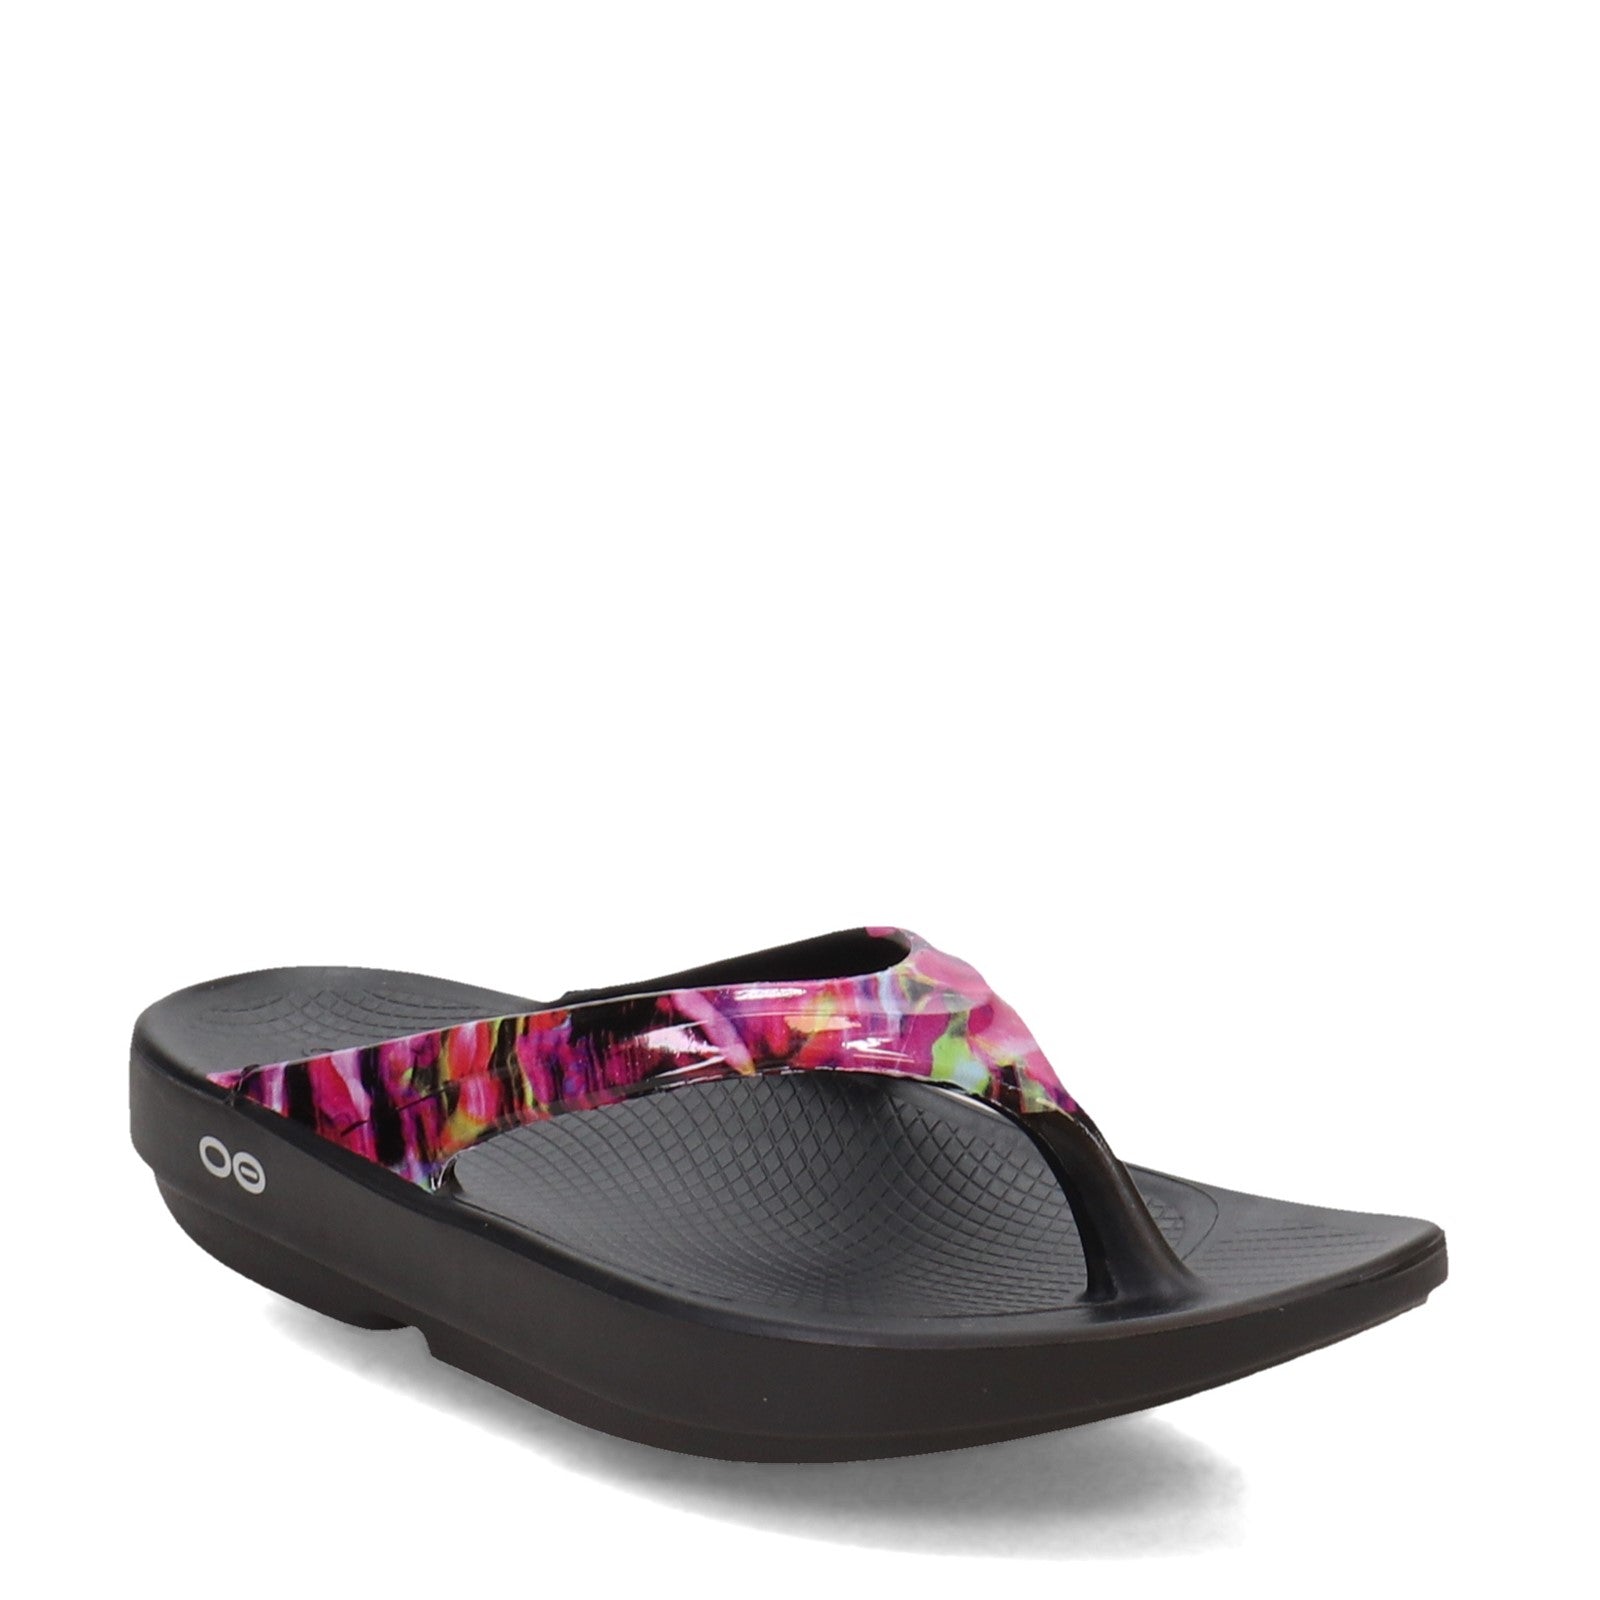 Oofos Women's Oolala Limited Thong Sandals-Neon Rose